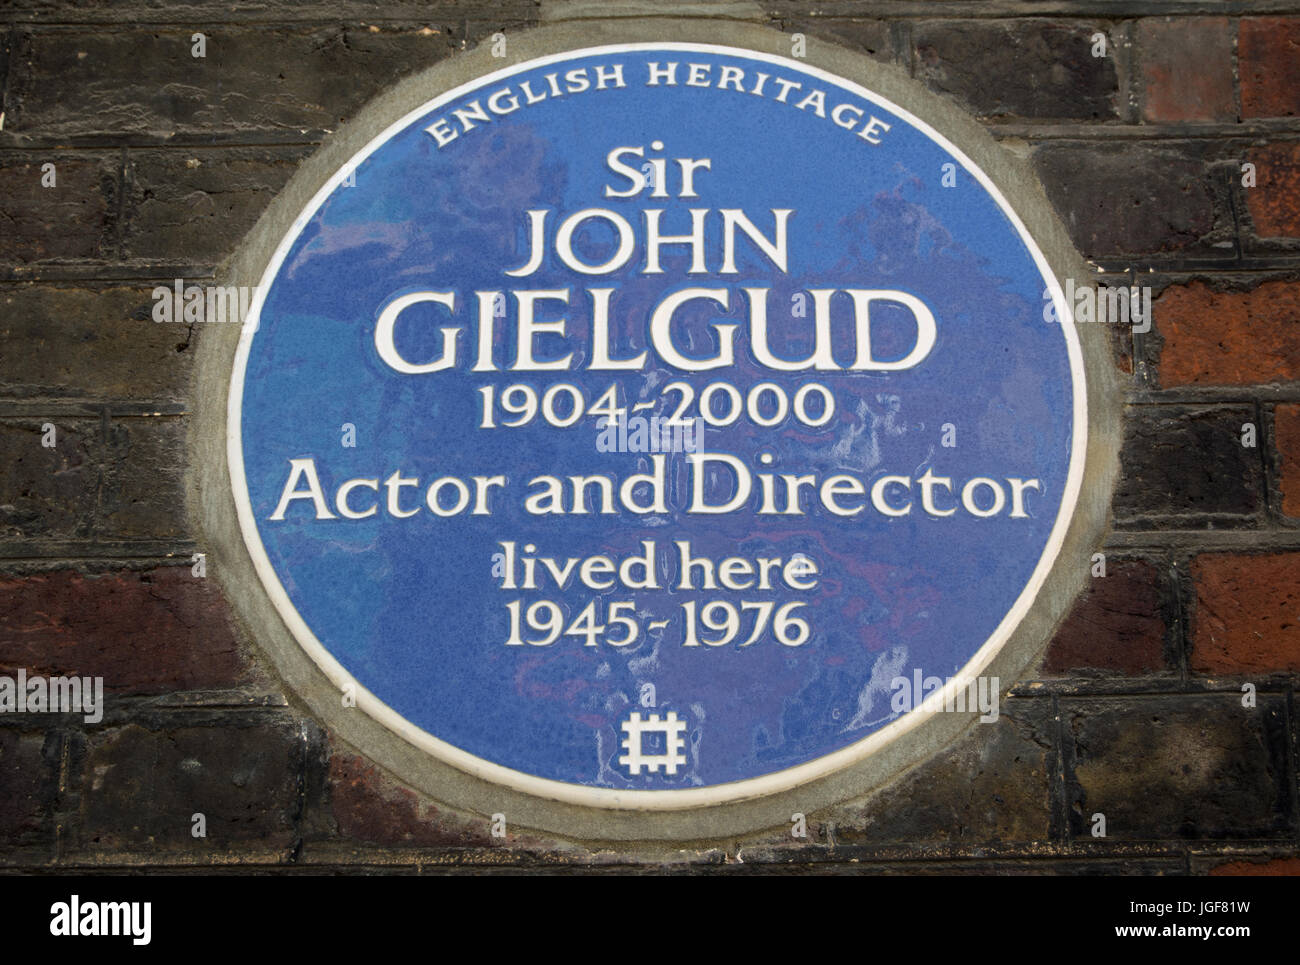 english heritage blue plaque marking a home of actor and director sir john gielgud, westminster, london, england Stock Photo